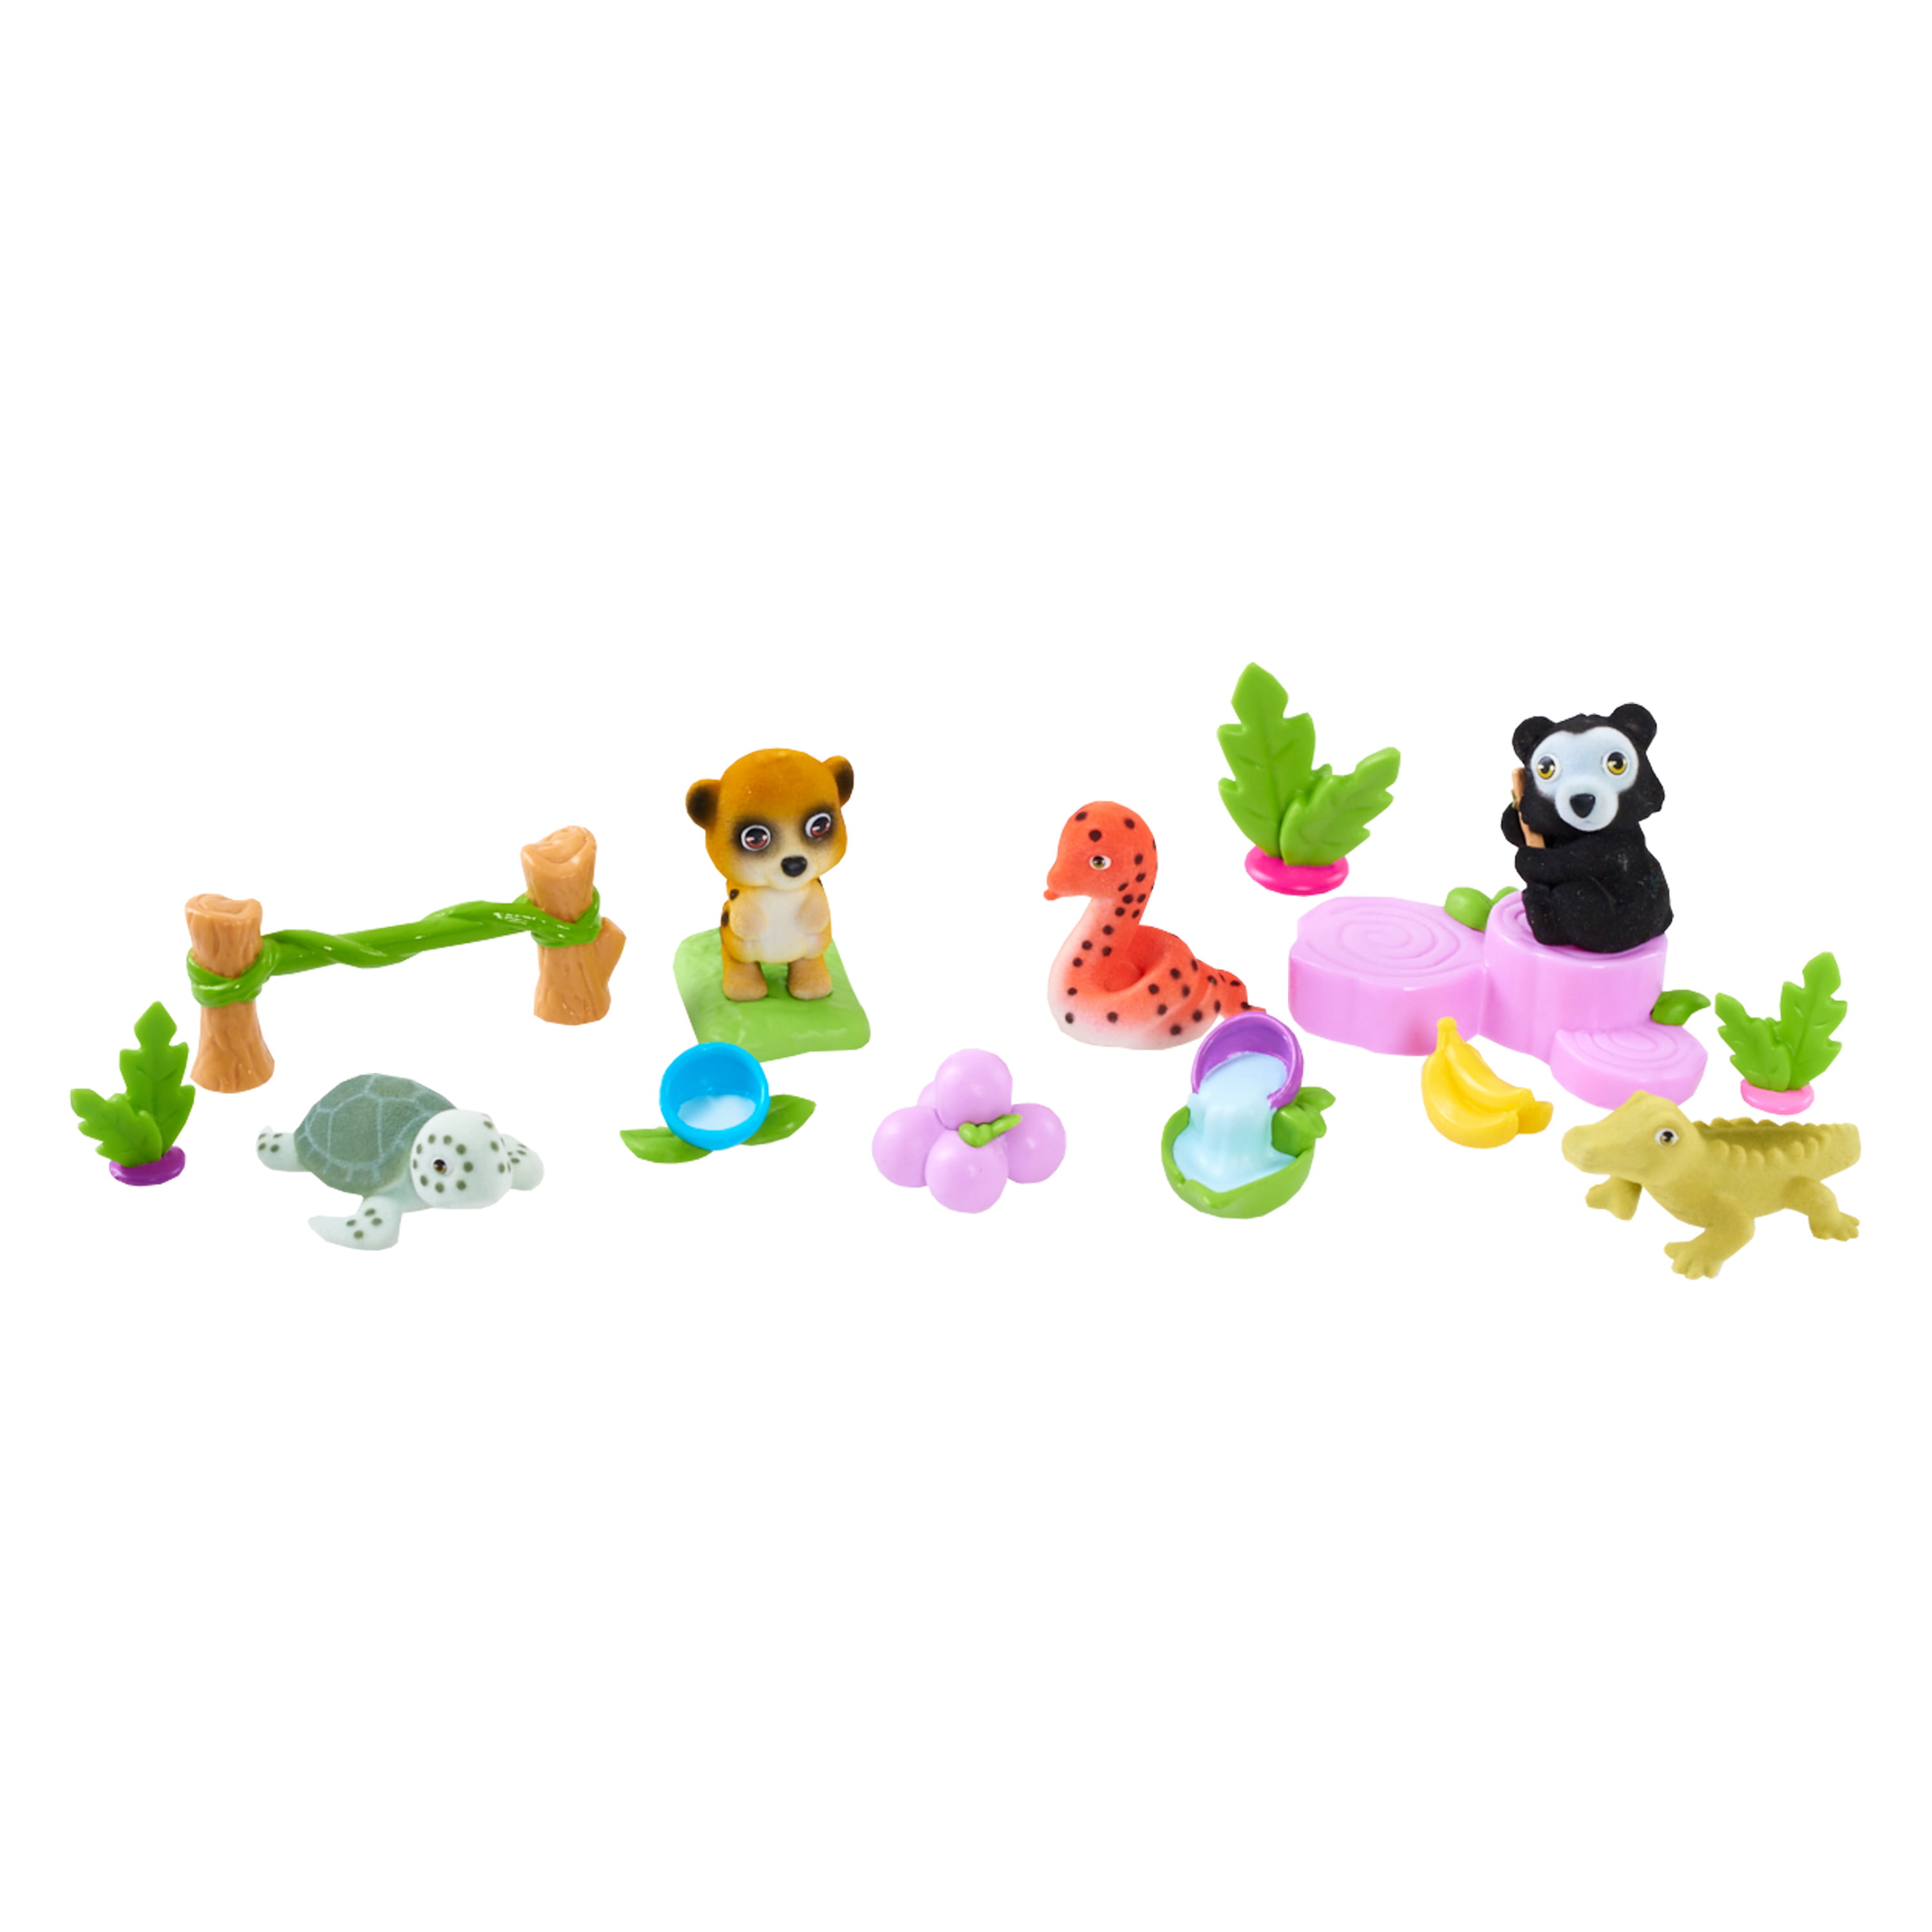 Jungle In My Pocket 15-Piece Playset - Hurdle and Bench 